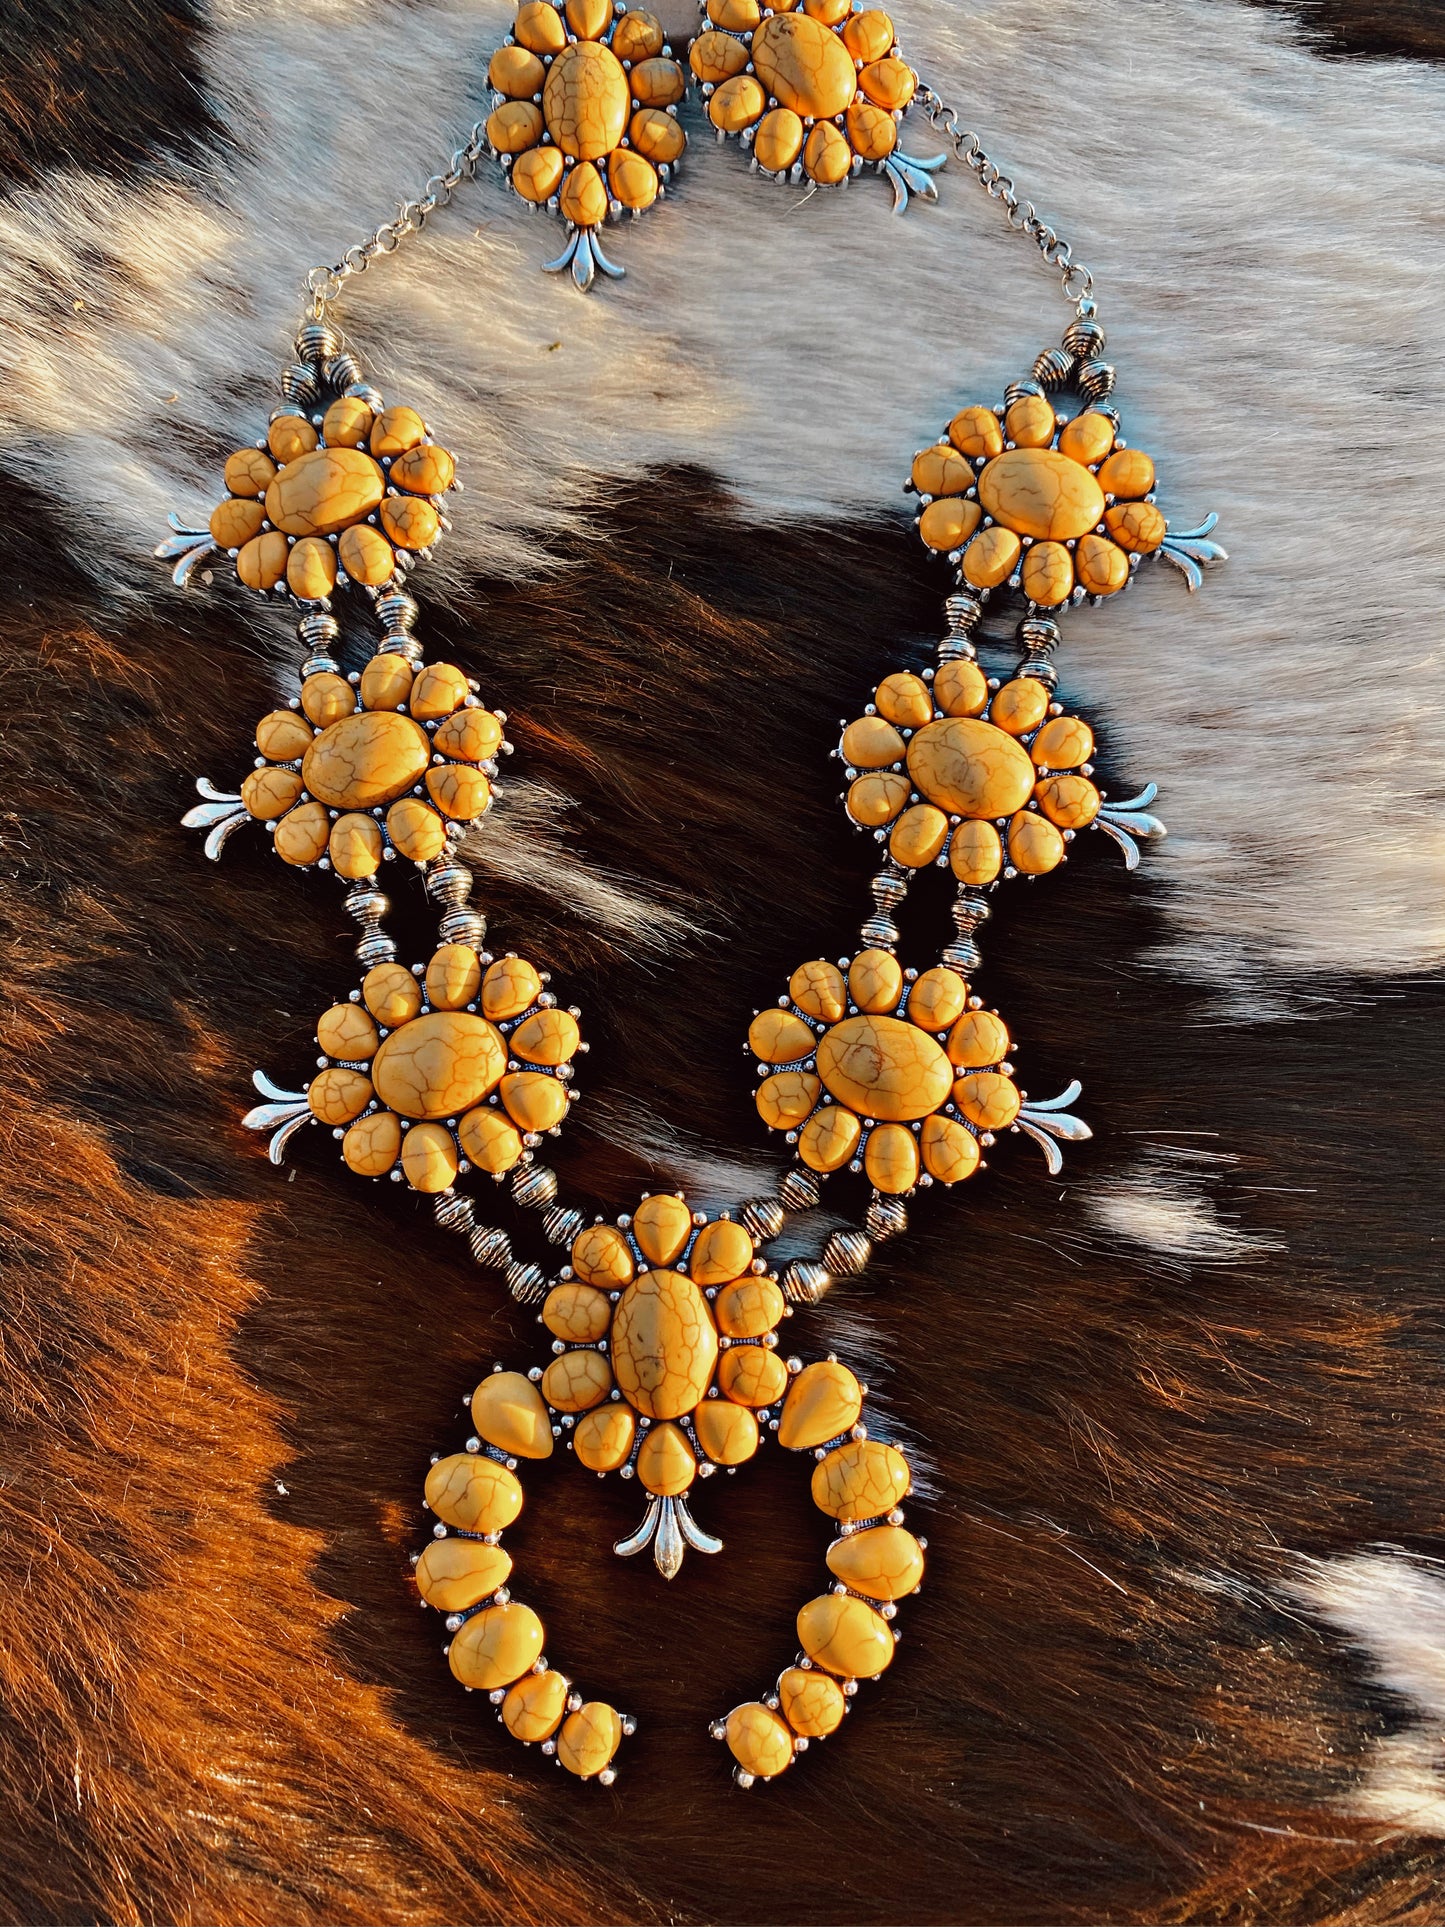 Yellow Beaded Flower Squash Blossom Navajo Inspired Pearl Necklace and Earring Set